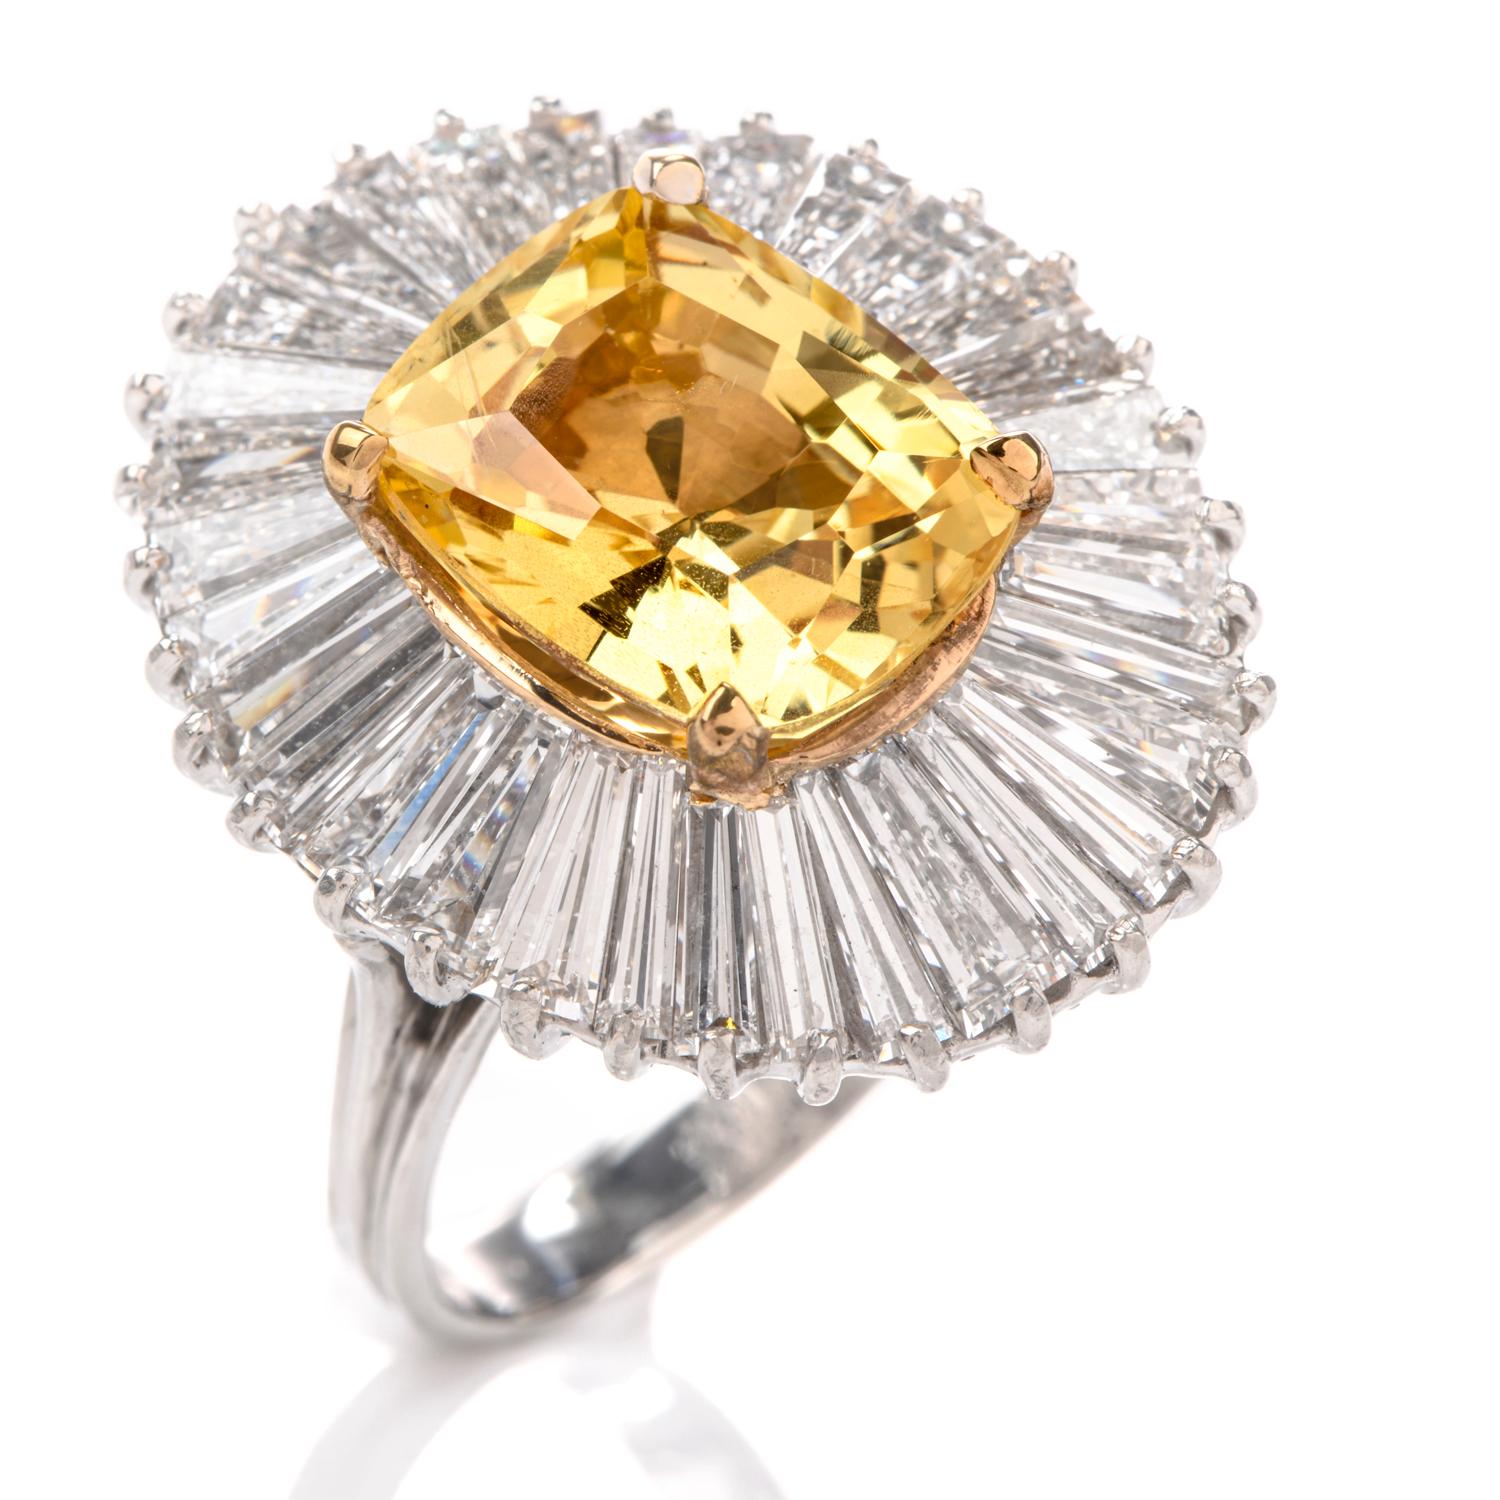 This Vibrant and Stately Diamond and GIA Certified Natural Yellow Sapphire

ring was inspired in a Ballerina design and crafted in 10.0 grams of luxurious Platinum.  Centered is a  6.46 carats non treated Natural Yellow Sapphire measuring 11.62 x